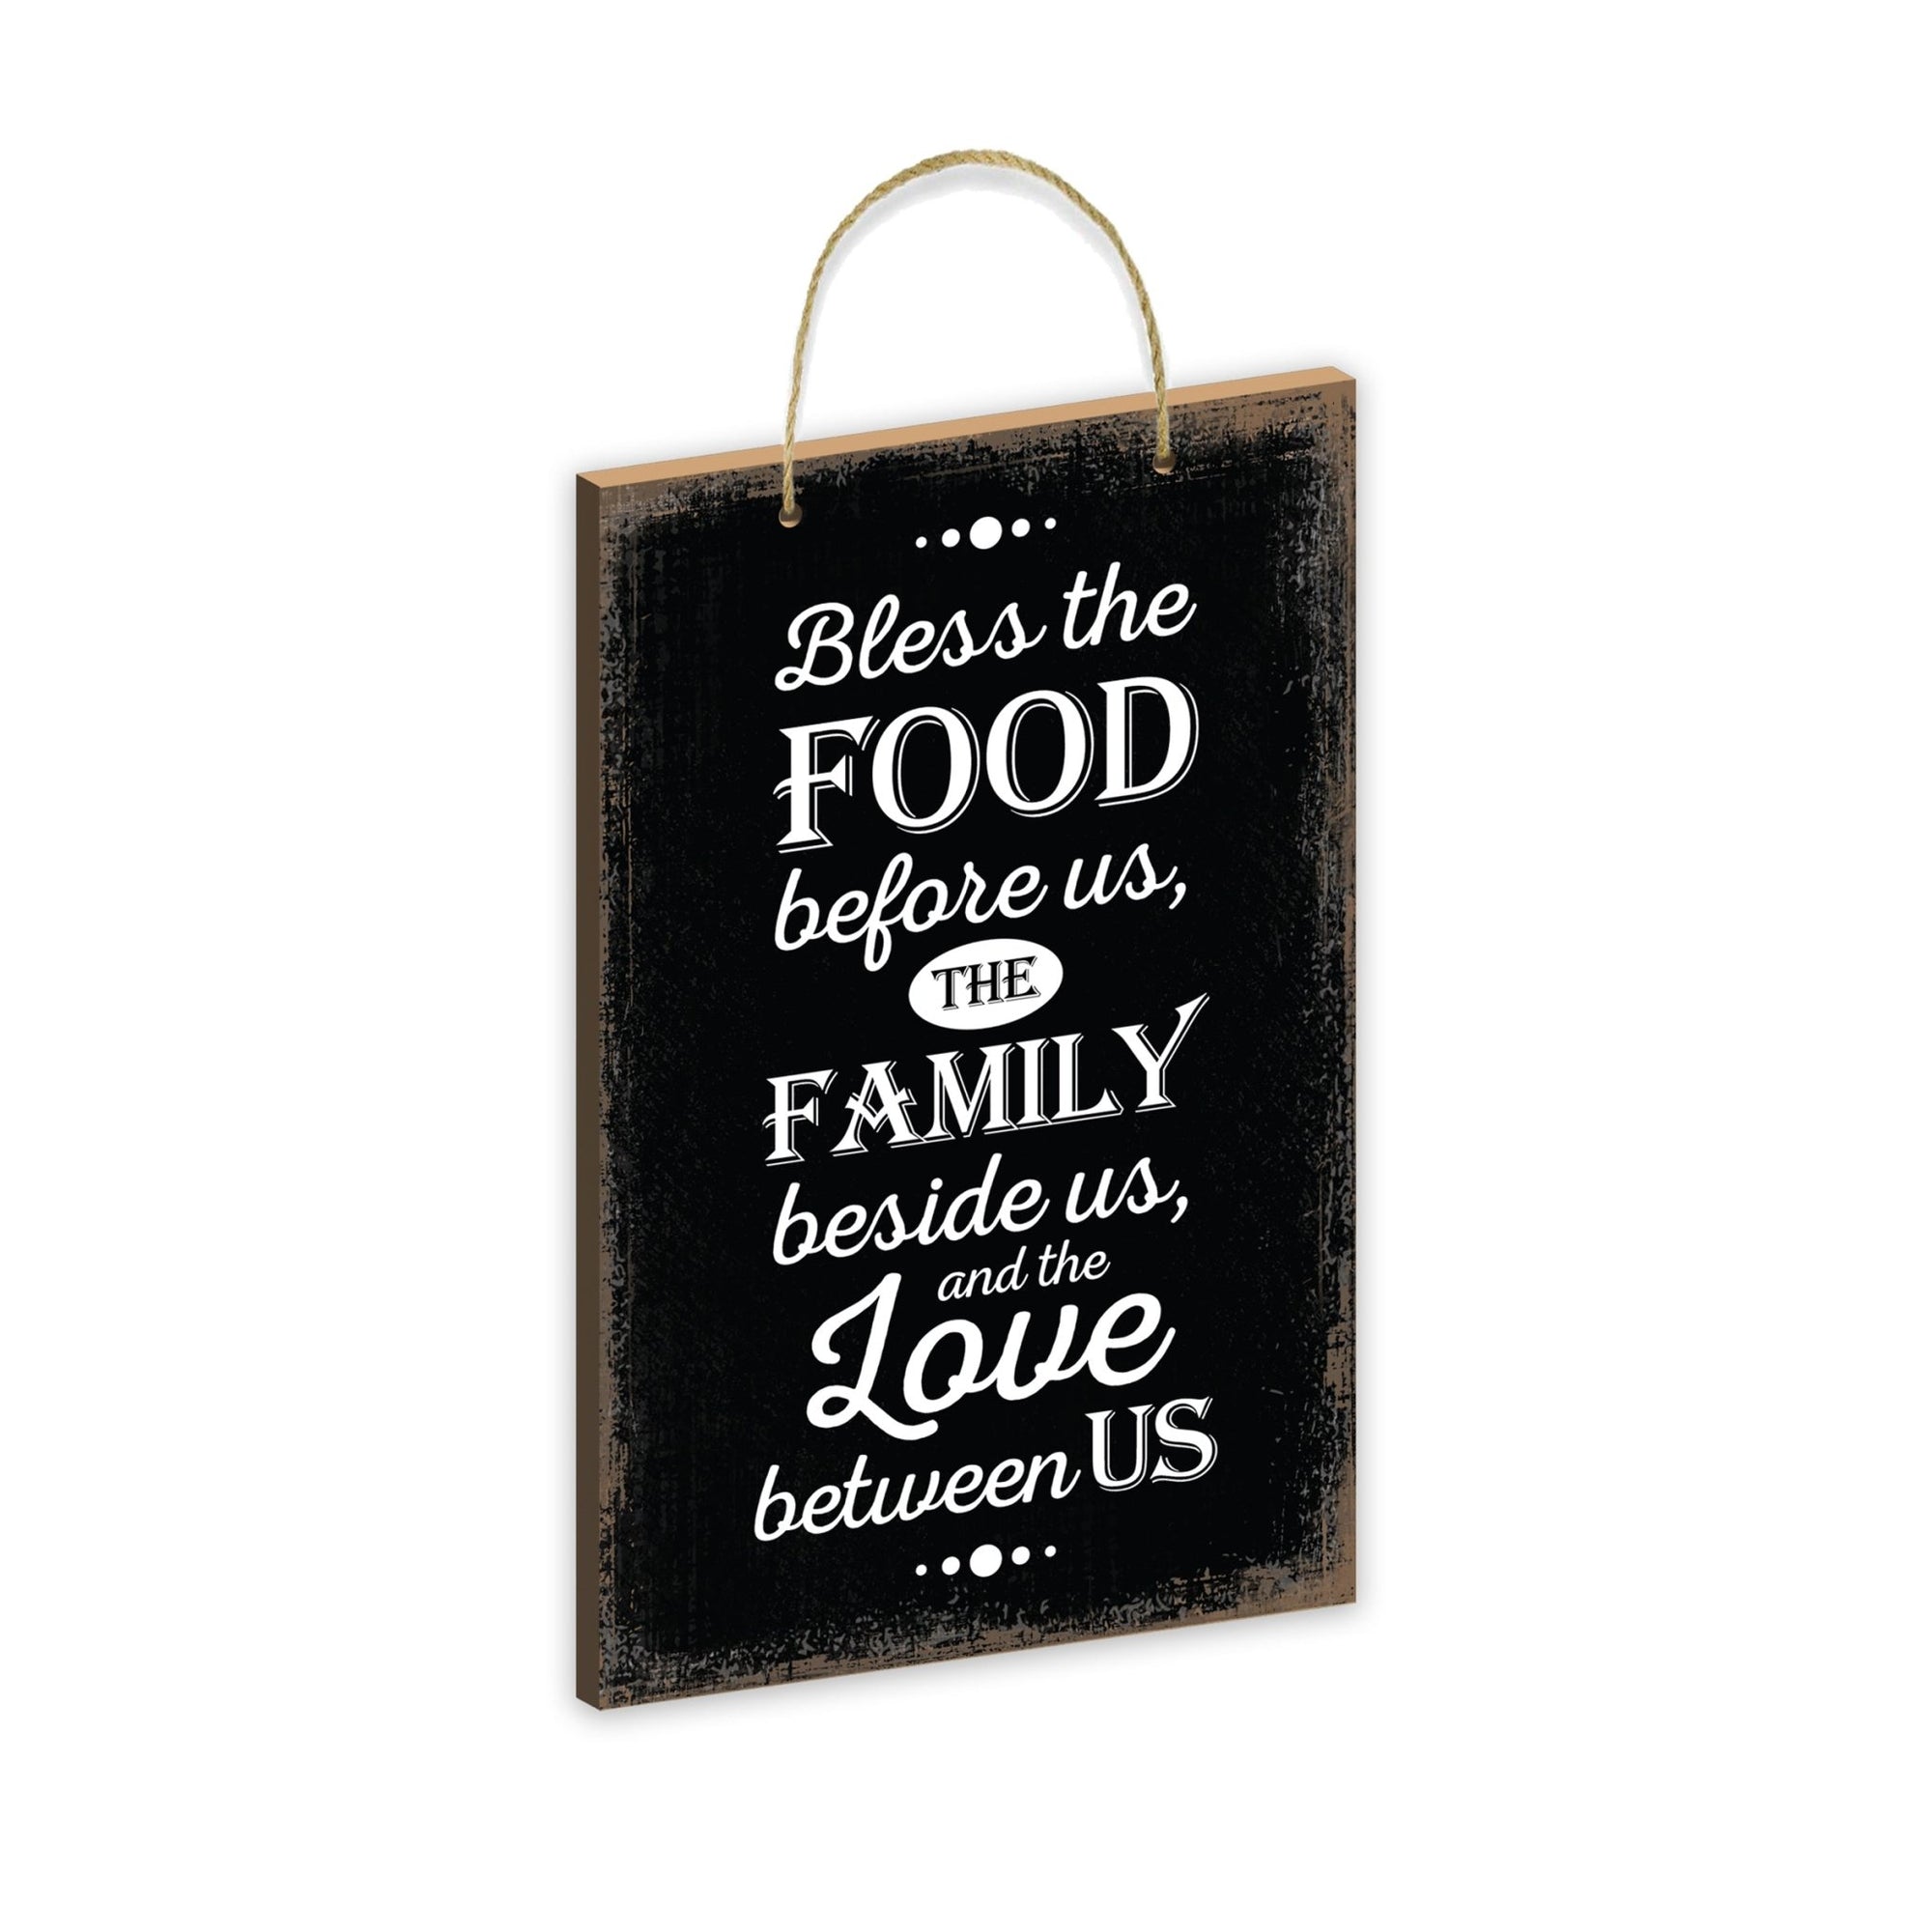 Inspirational Wooden Rustic Wall Hanging Rope Sign Kitchen Home Décor - Bless The Food - LifeSong Milestones